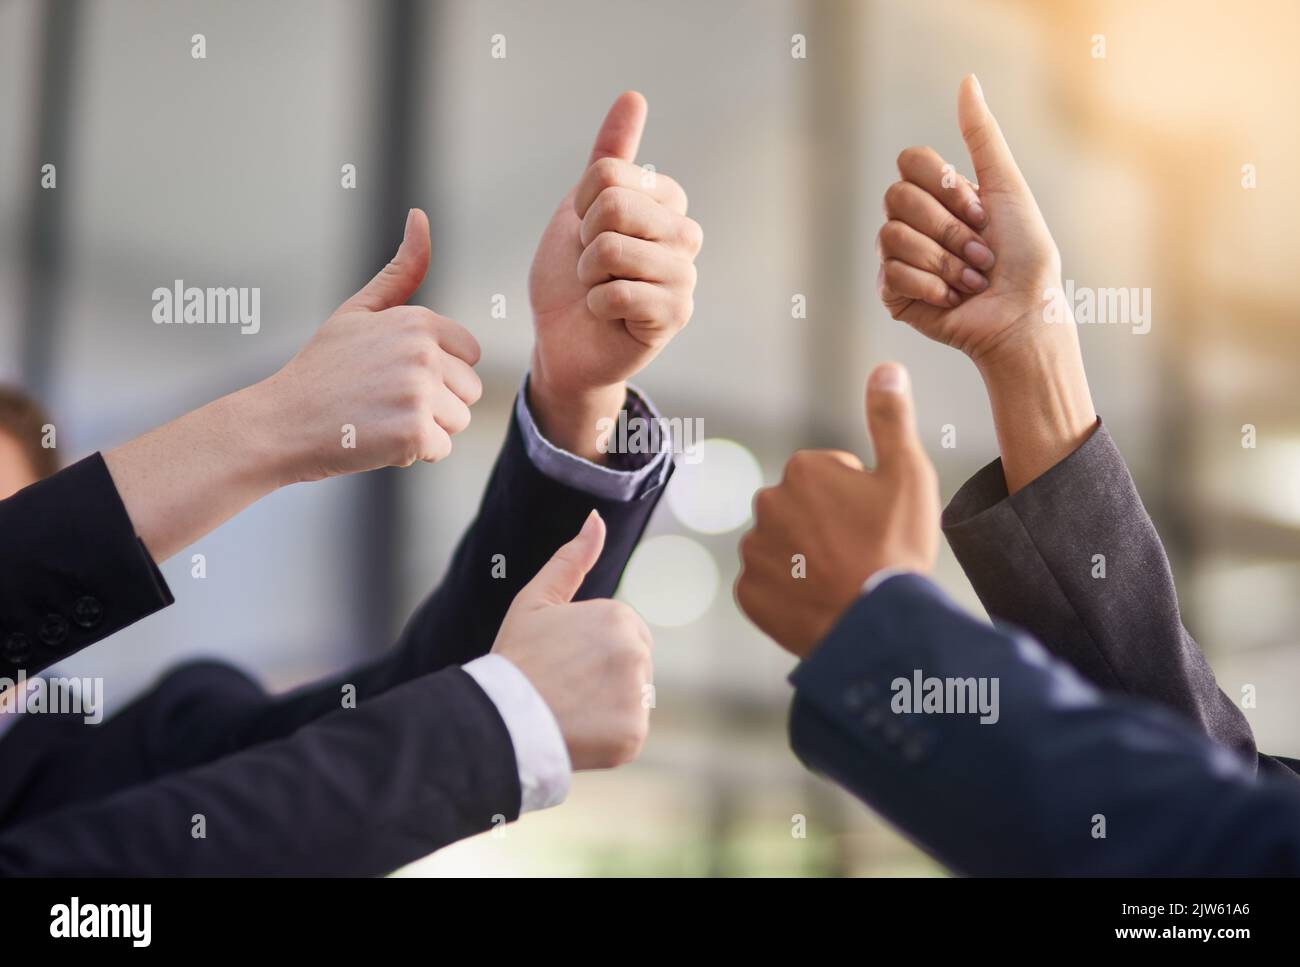 Thumbs up to your achievements. a group of office workers giving thumbs up together. Stock Photo